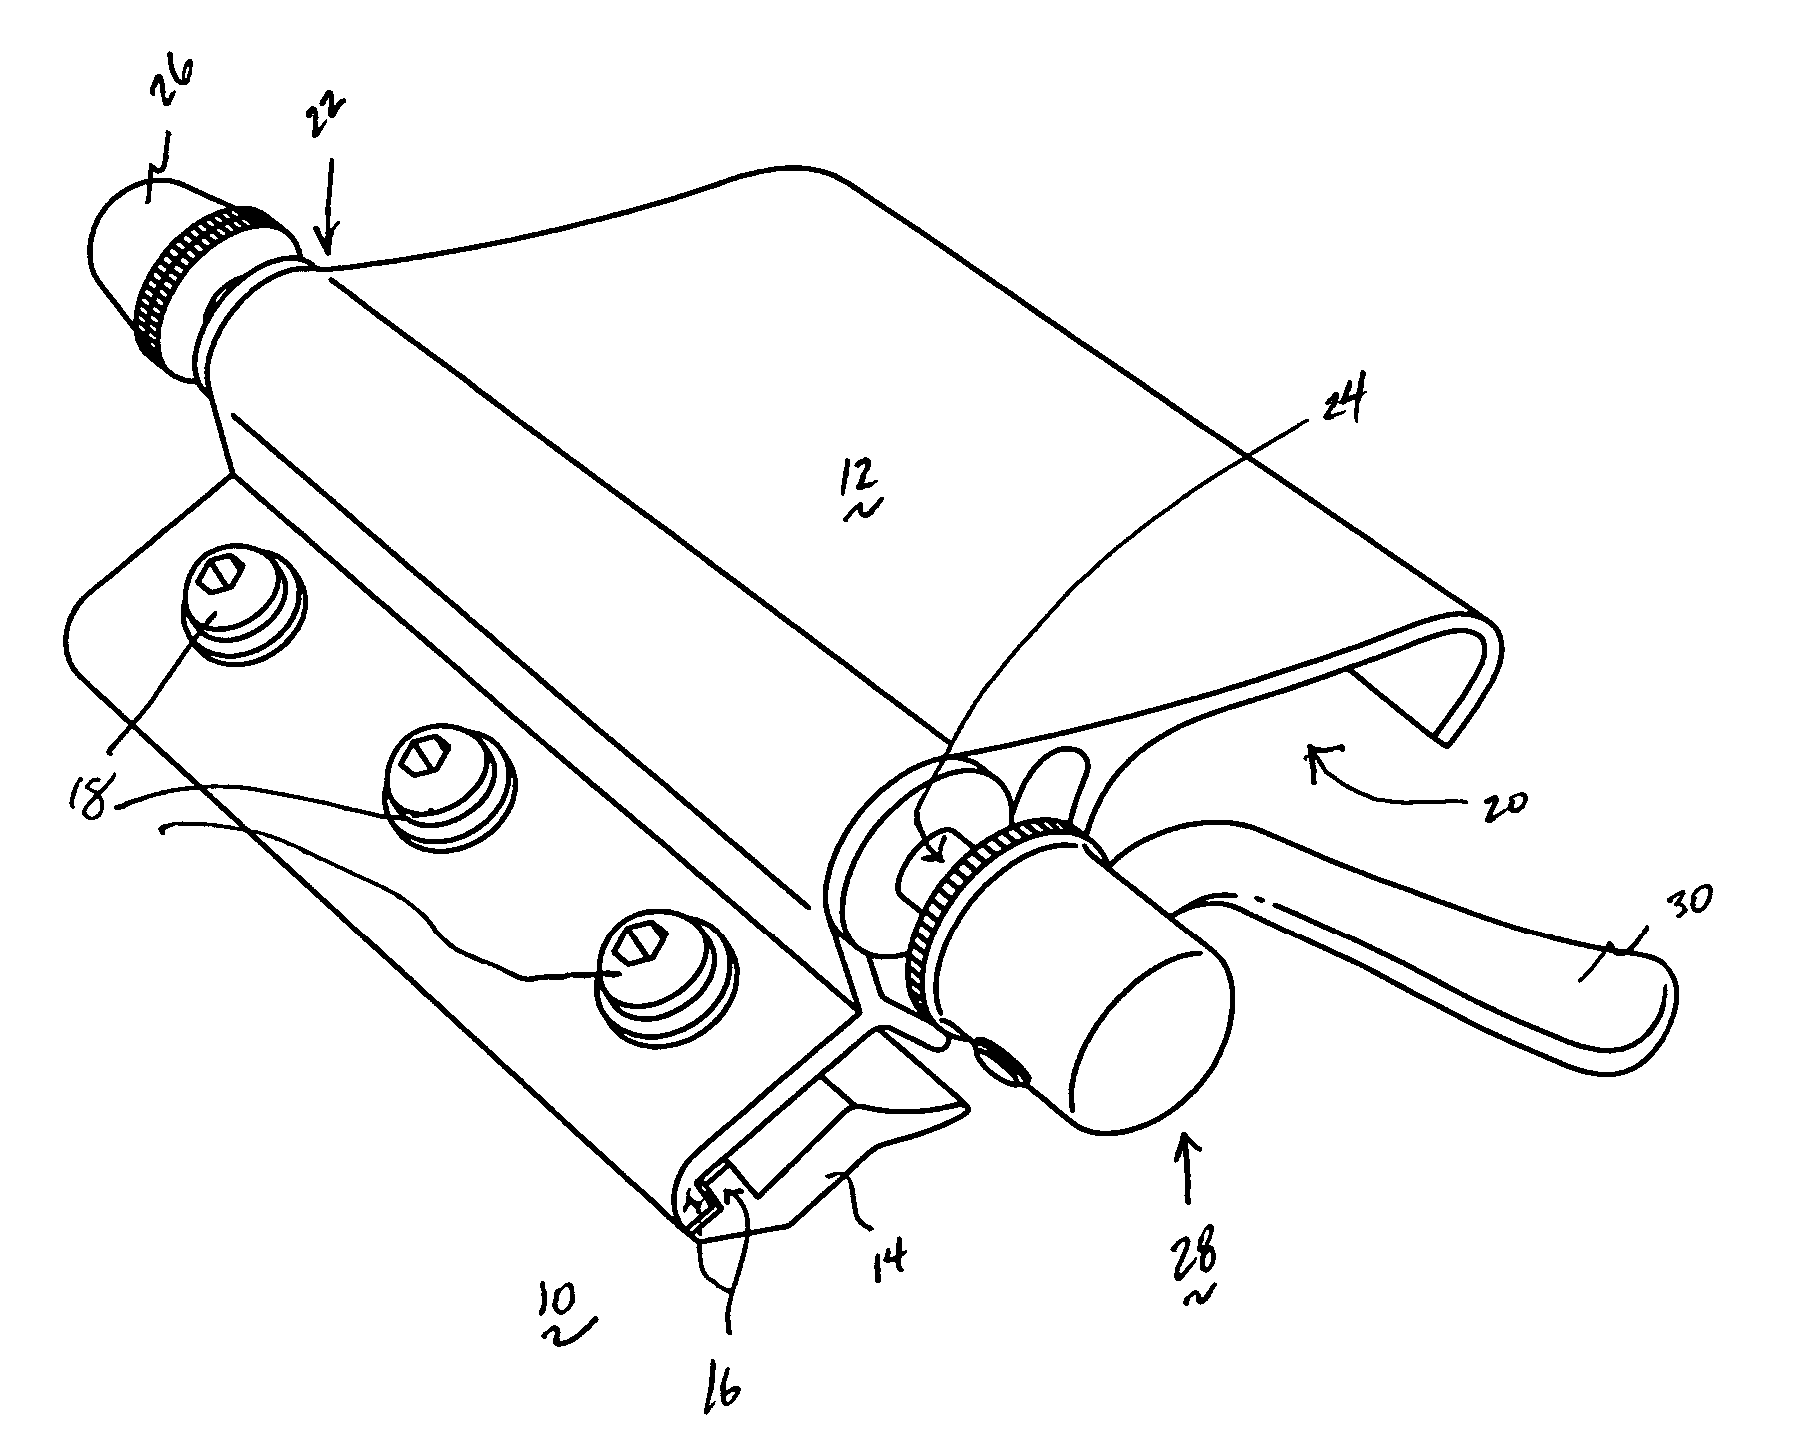 Article carrier and bicycle rack system